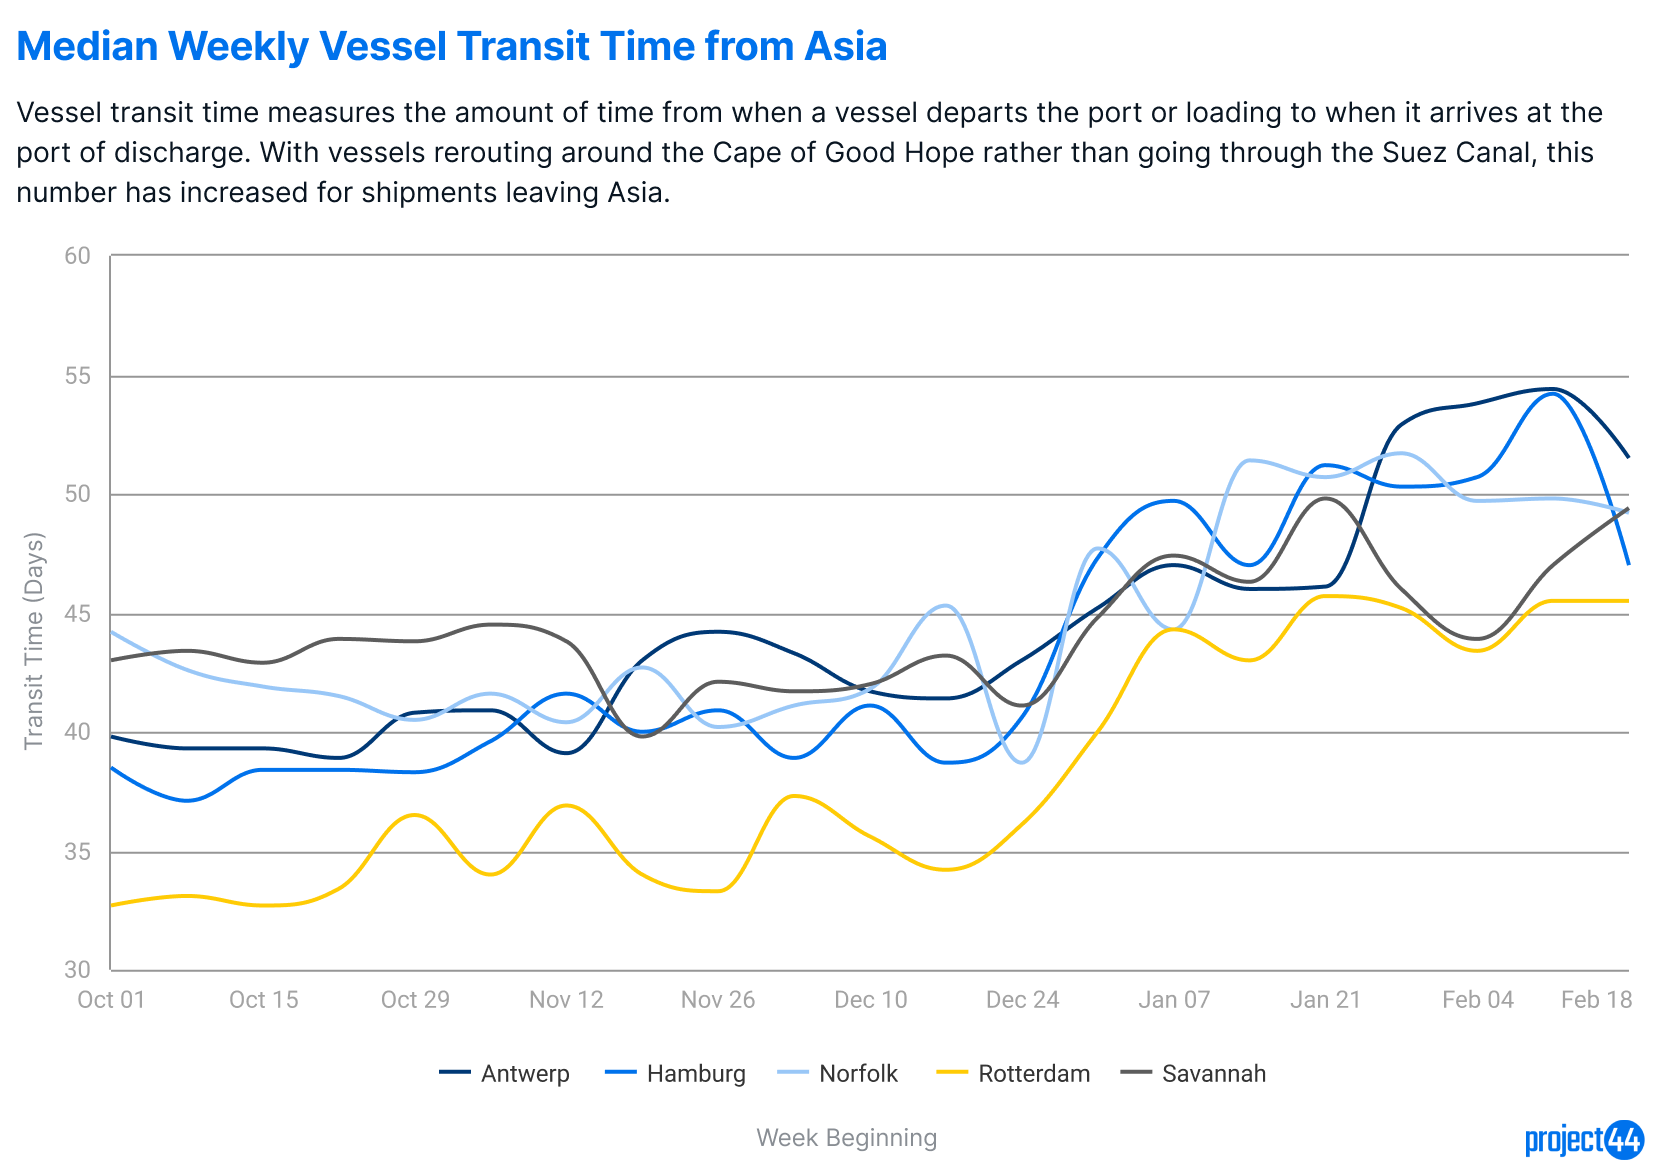 Feb 26 Vessel Transit Times from Asia